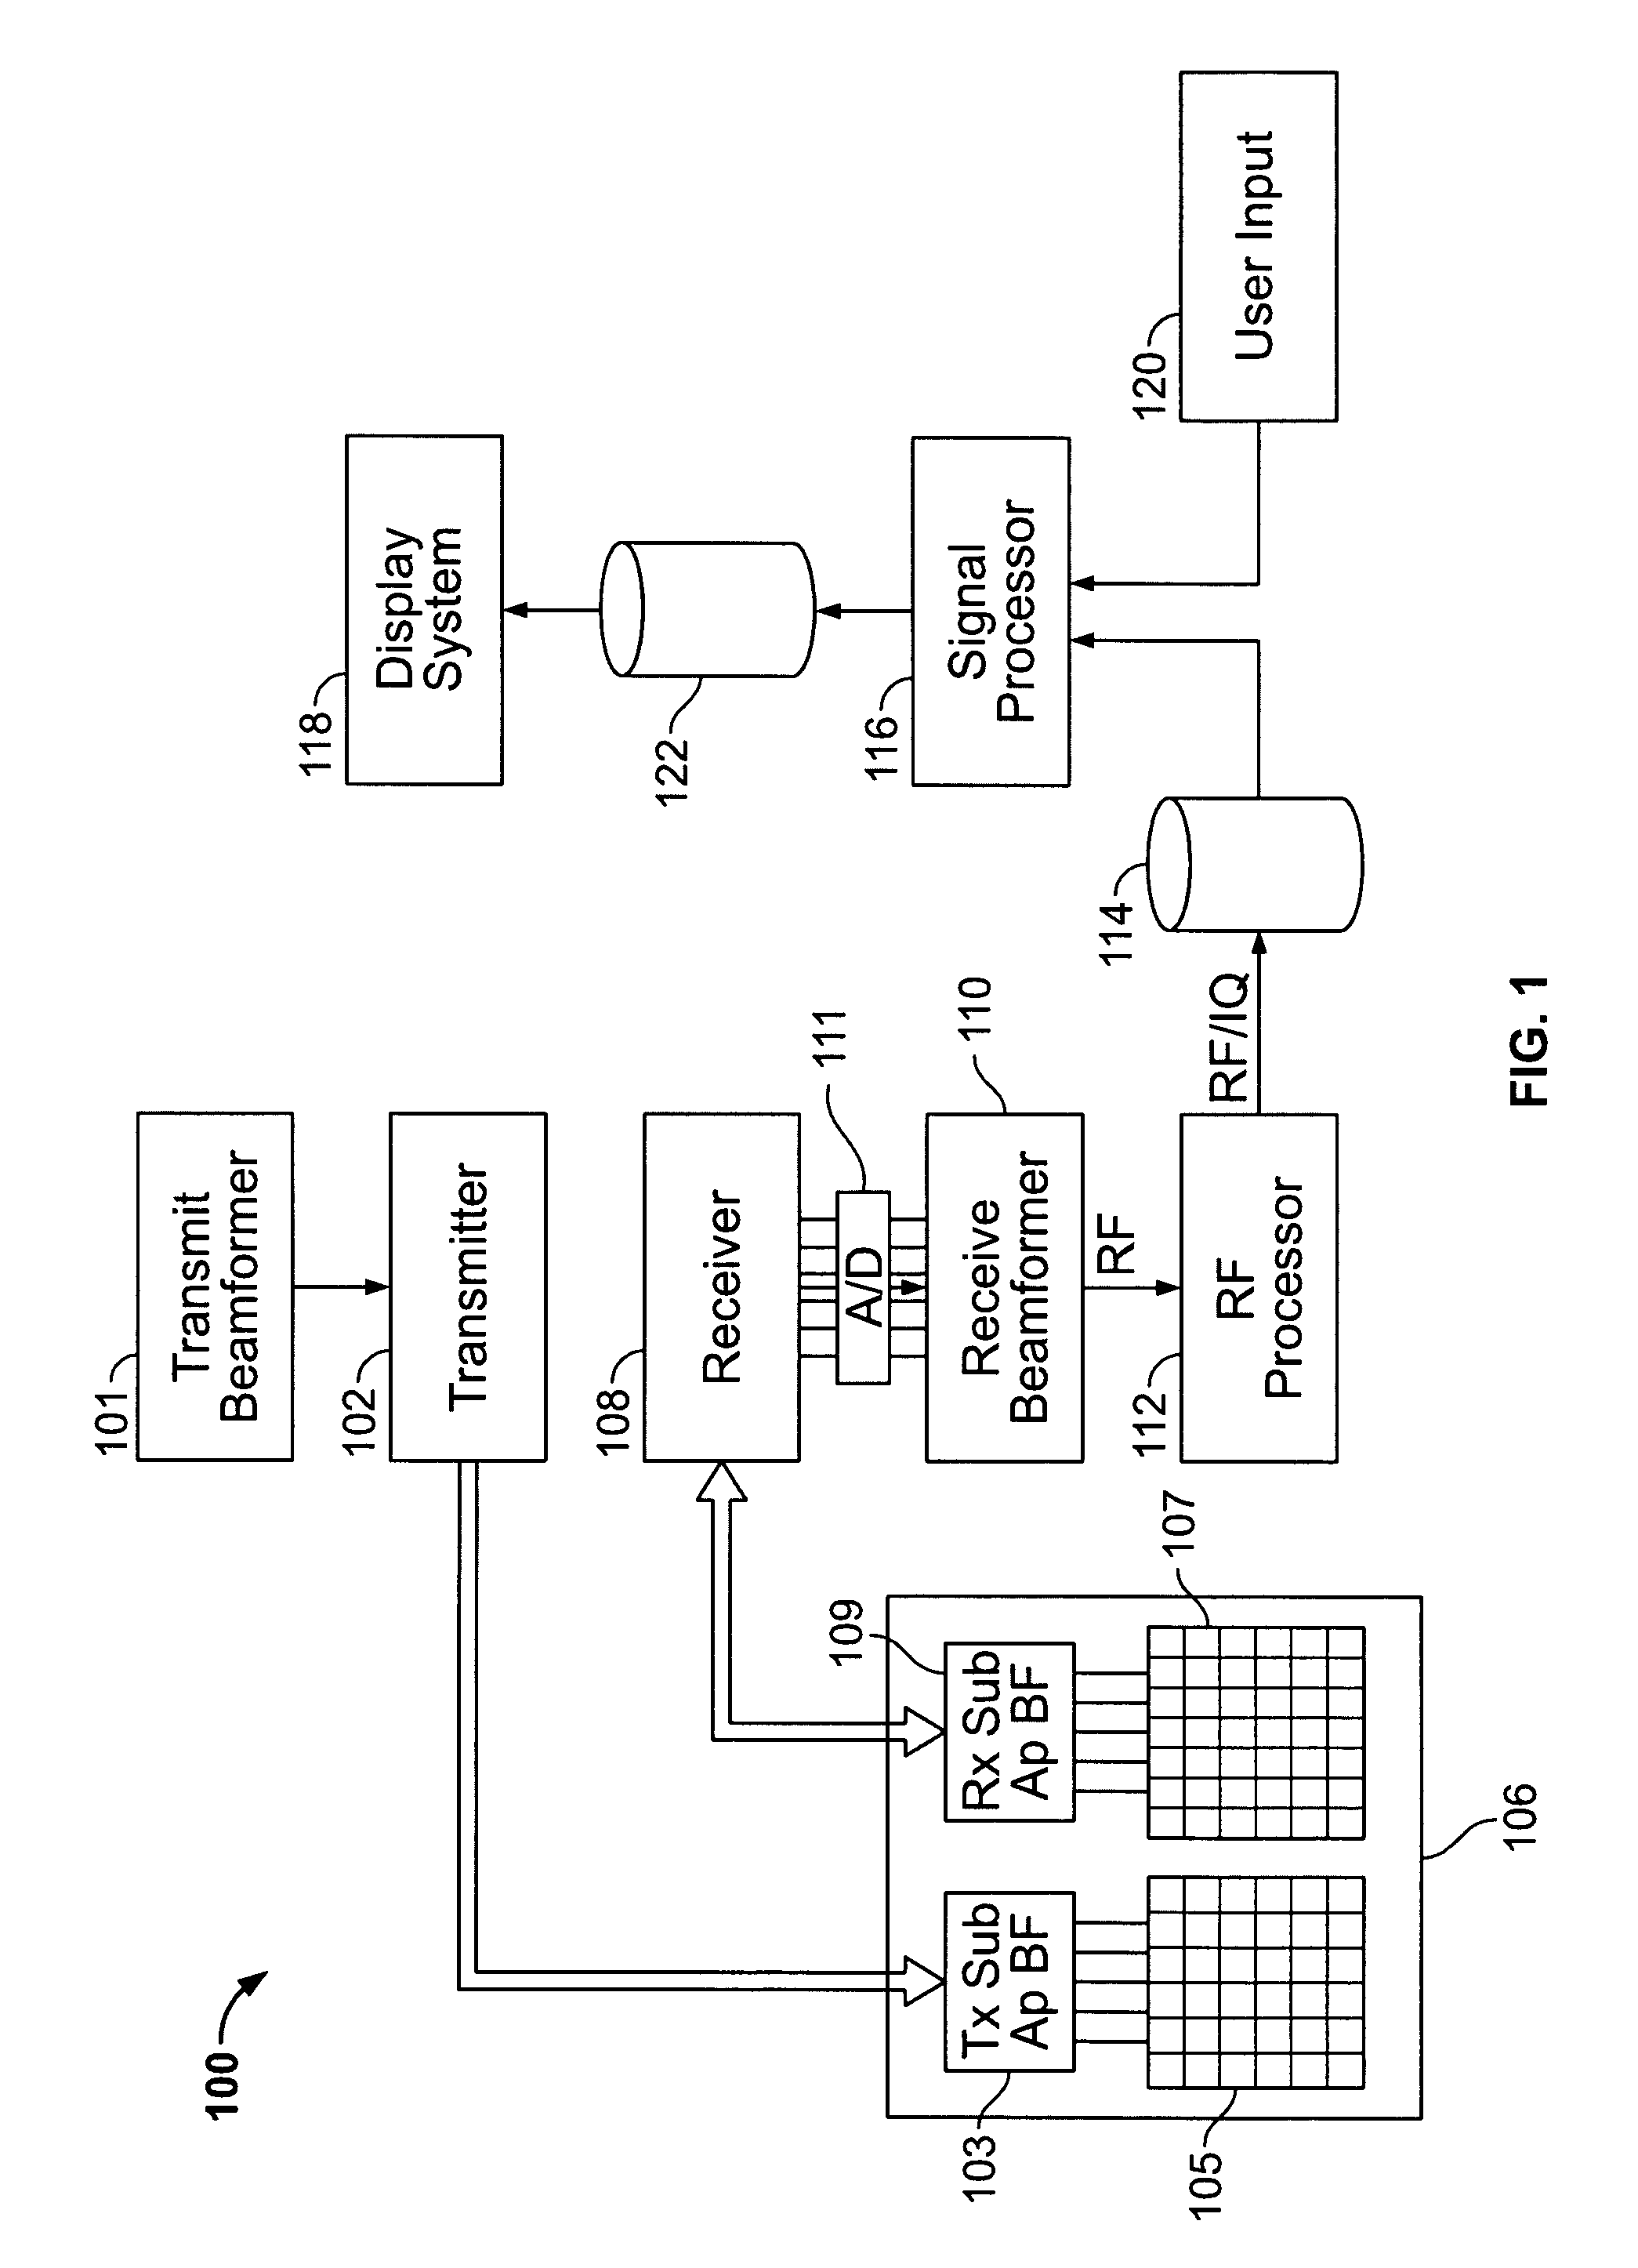 Method and apparatus for performing CW doppler ultrasound utilizing a 2D matrix array